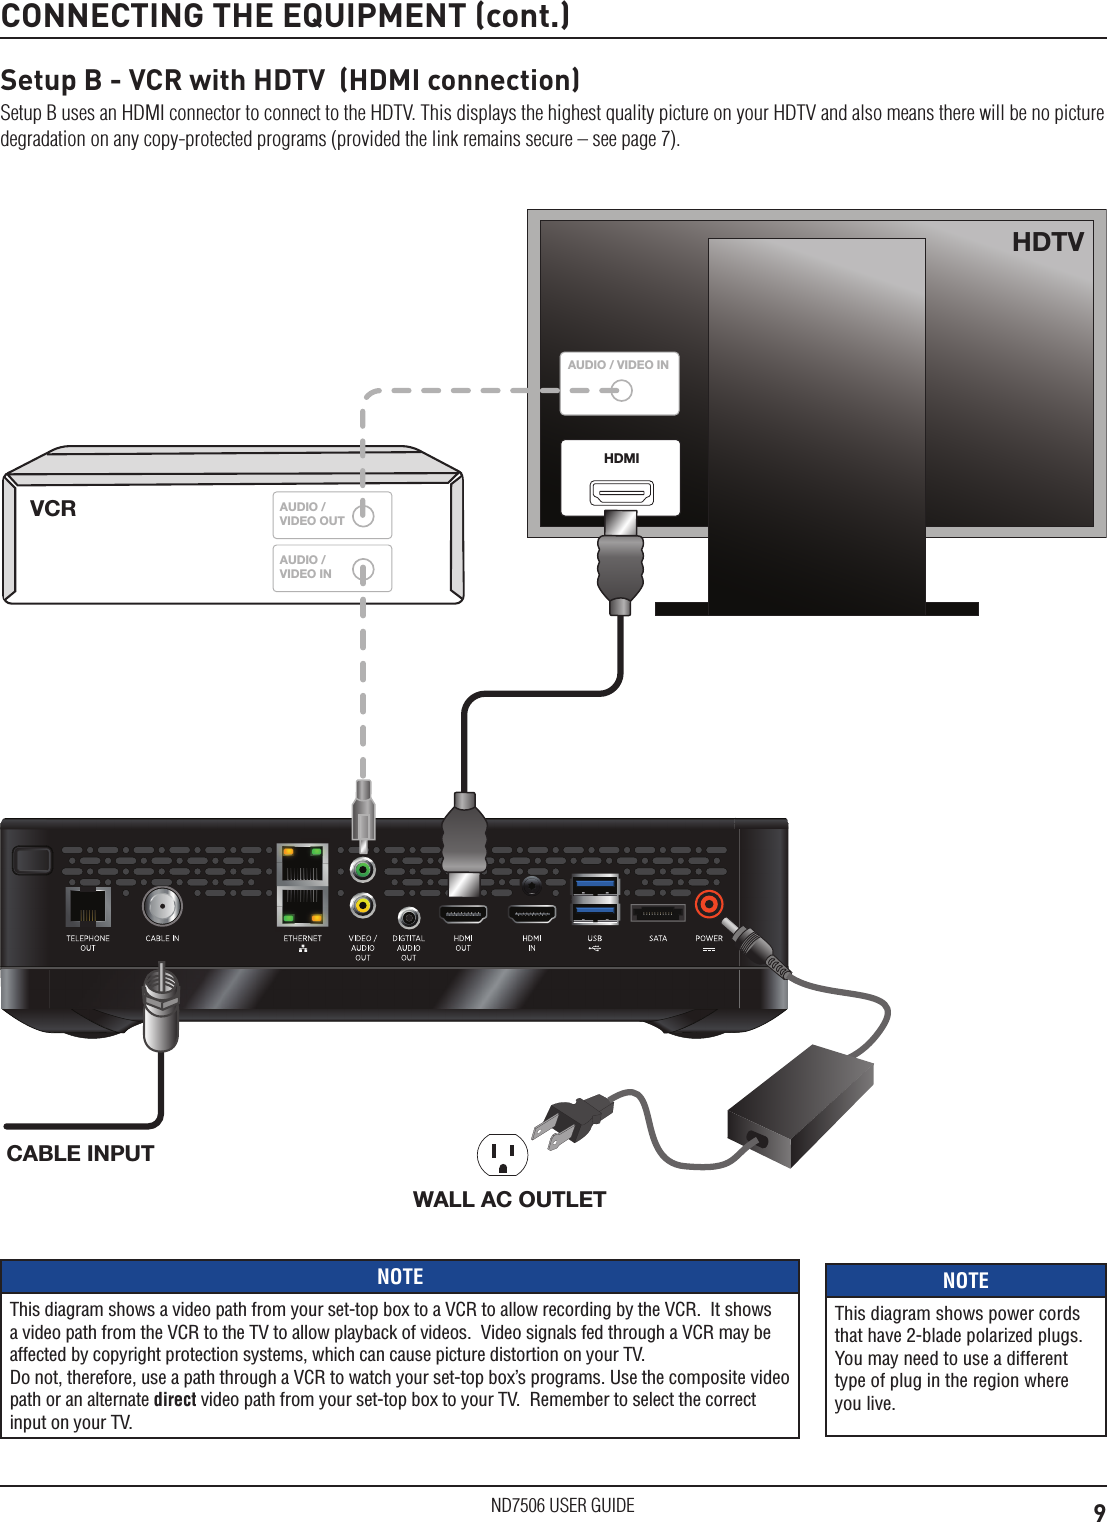 9ND7506 USER GUIDECONNECTING THE EQUIPMENT (cont.)Setup B - VCR with HDTV  (HDMI connection)Setup B uses an HDMI connector to connect to the HDTV. This displays the highest quality picture on your HDTV and also means there will be no picture degradation on any copy-protected programs (provided the link remains secure – see page 7).NOTEThis diagram shows a video path from your set-top box to a VCR to allow recording by the VCR.  It shows a video path from the VCR to the TV to allow playback of videos.  Video signals fed through a VCR may be affected by copyright protection systems, which can cause picture distortion on your TV.   Do not, therefore, use a path through a VCR to watch your set-top box’s programs. Use the composite video path or an alternate direct video path from your set-top box to your TV.  Remember to select the correct input on your TV.NOTEThis diagram shows power cords that have 2-blade polarized plugs. You may need to use a different type of plug in the region where you live.VCR AUDIO / VIDEO OUTAUDIO / VIDEO INAUDIO / VIDEO INHDMIHDTVCABLE INPUTWALL AC OUTLET